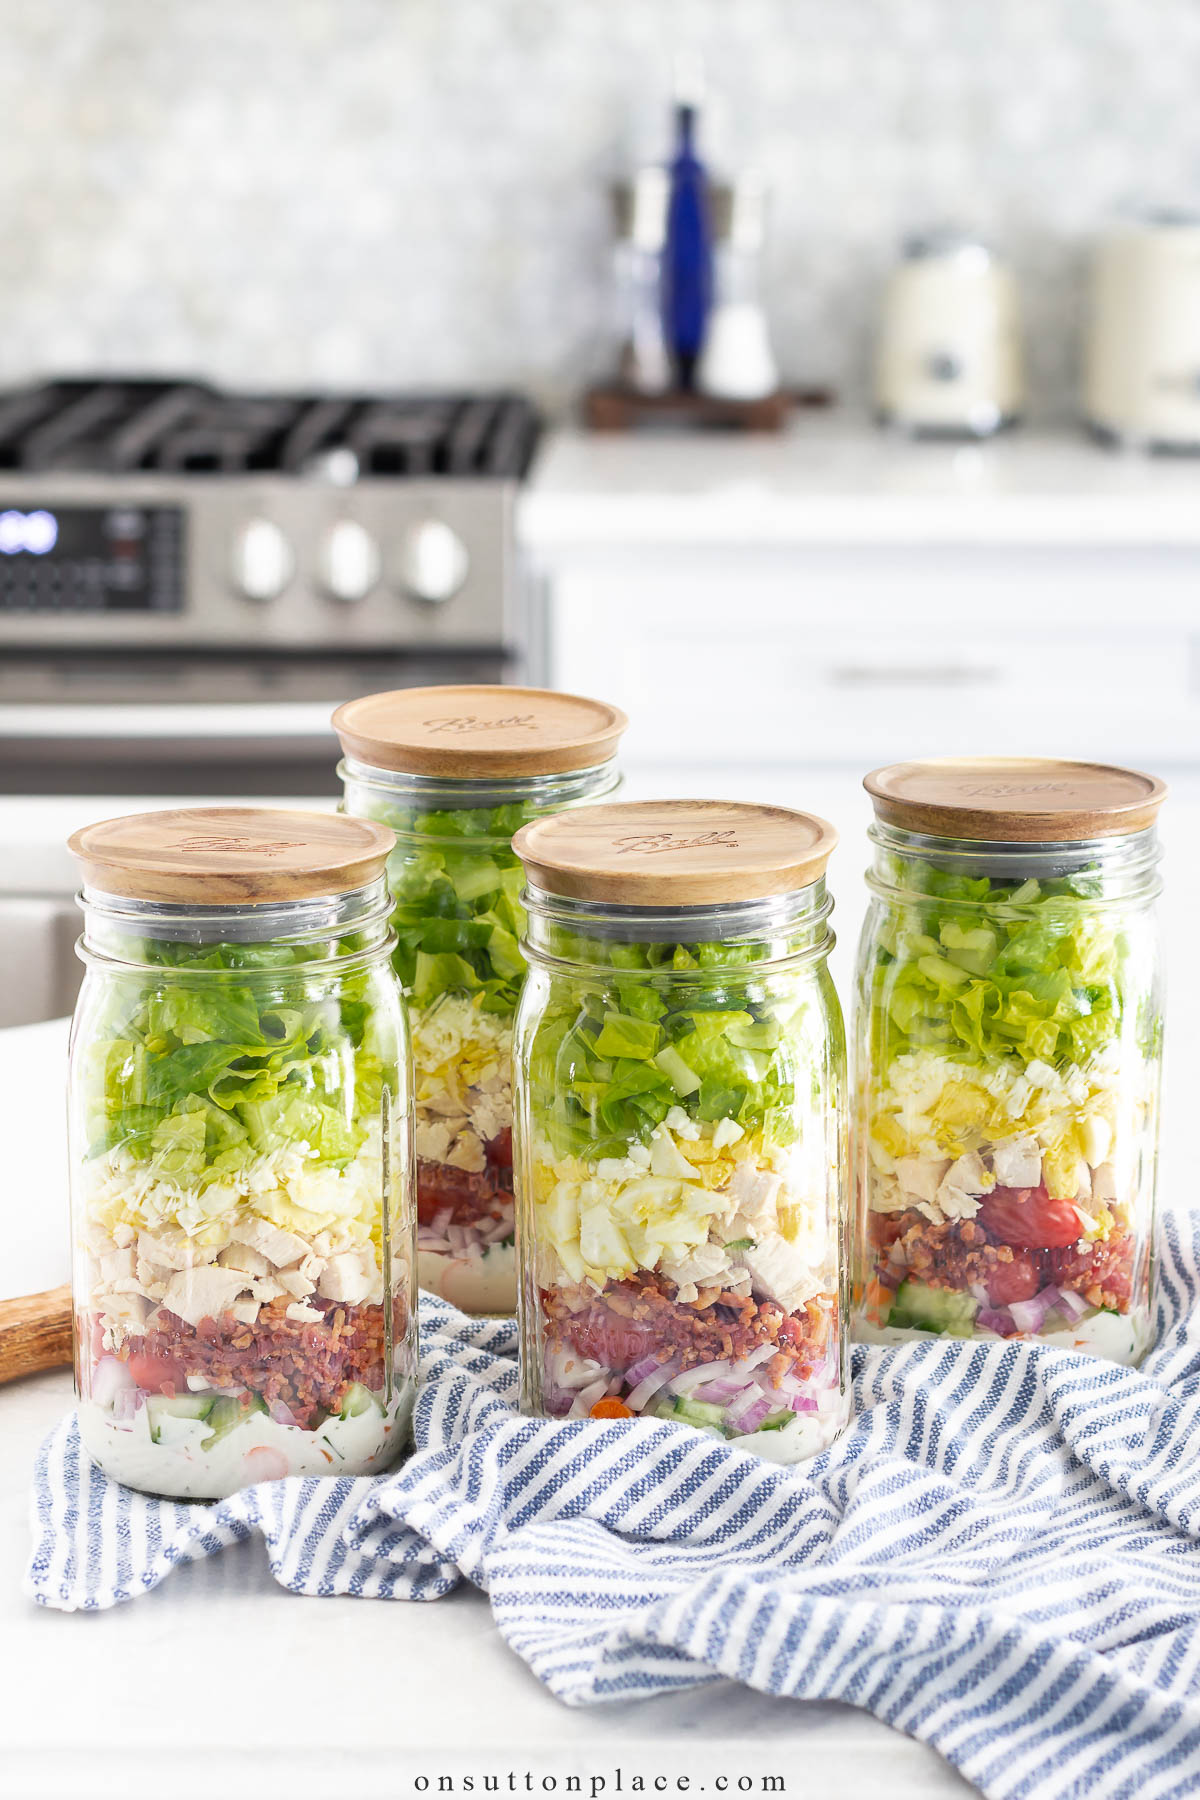 Easy Salad Dressing & Another Use for Your Mason Jars